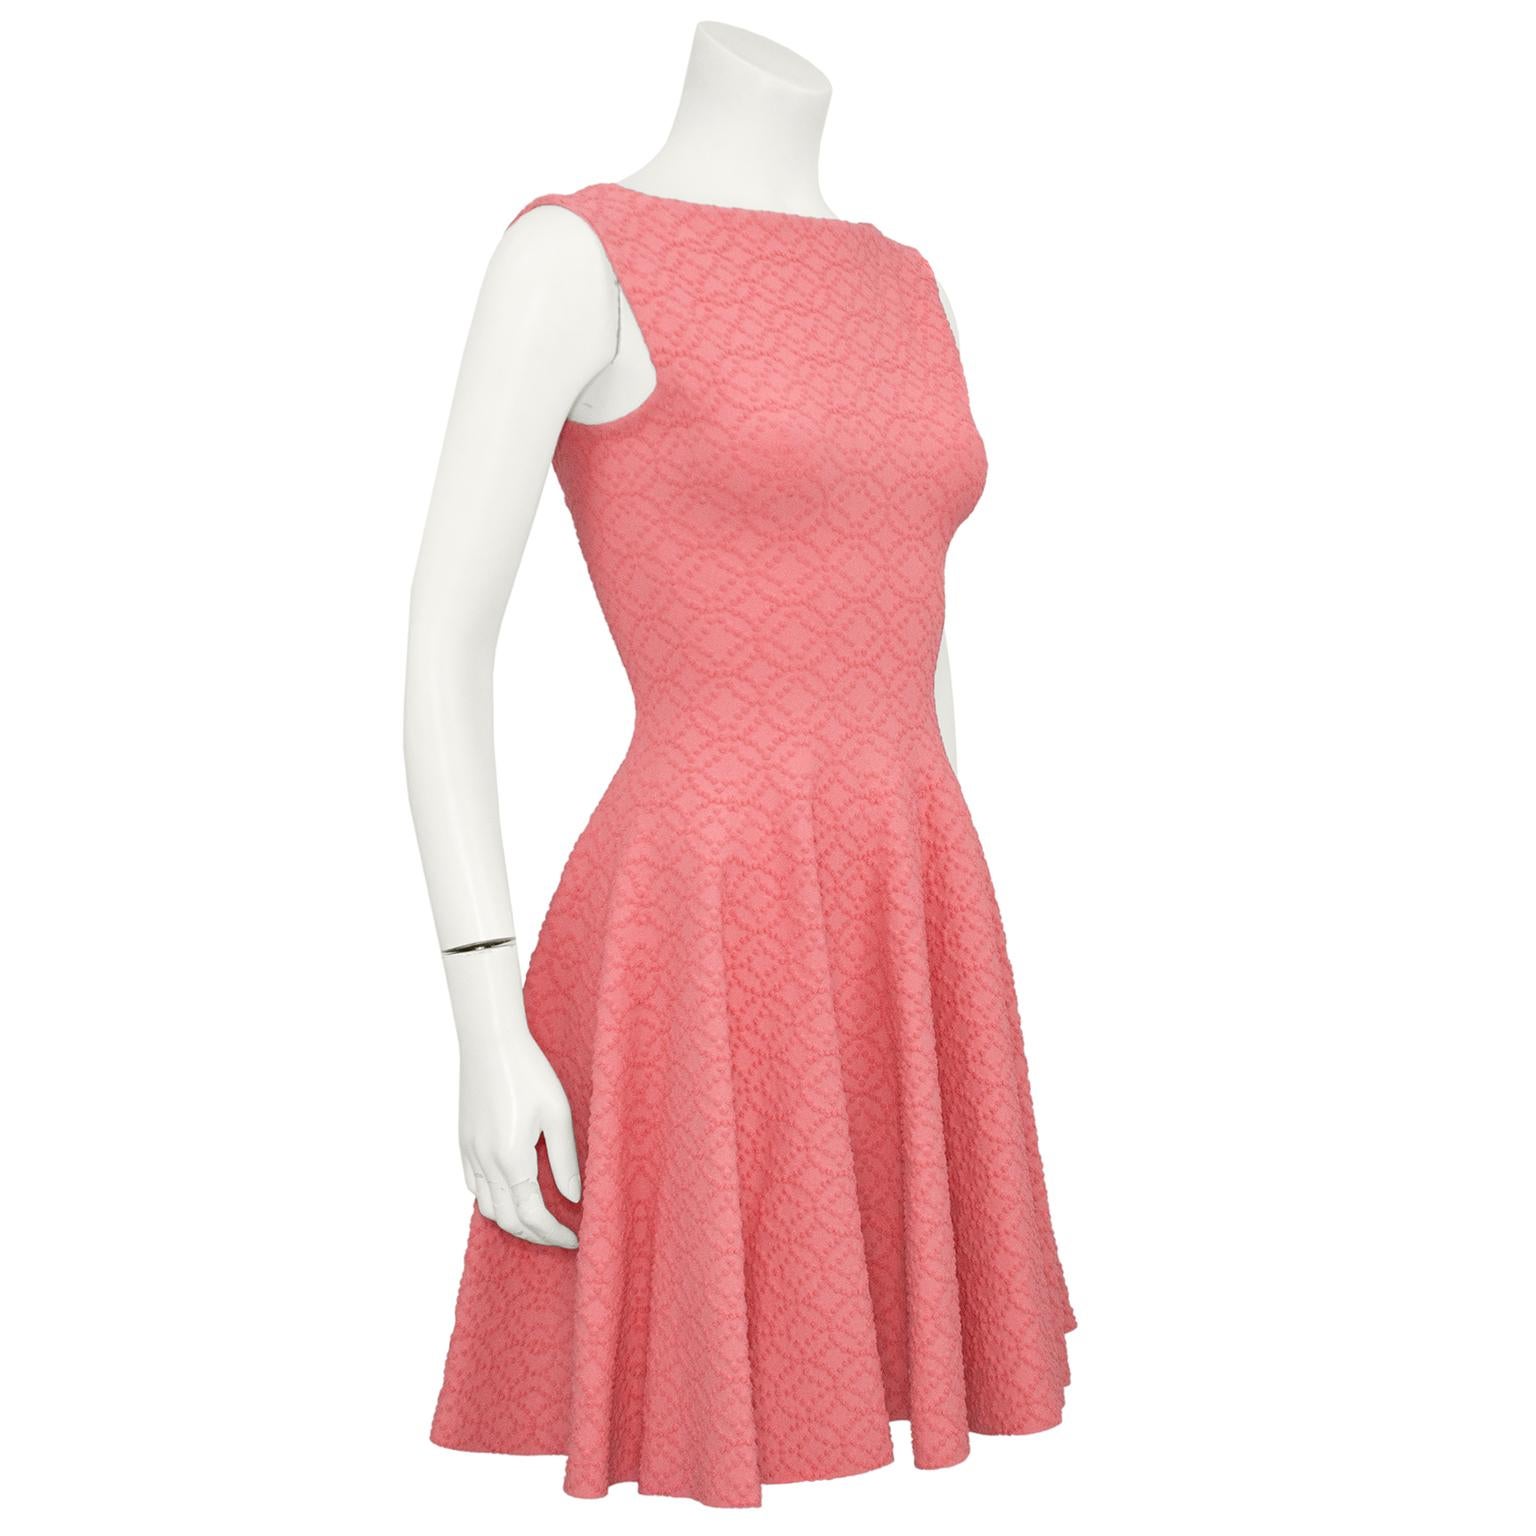 Salmon pink Azzedine Alaia skater dress from 2012. Sleeveless with a boat neckline. Fitted through the body with an aline skirt. The low back contrasts beautifully with the higher neckline in the front. Made in the classic Alaia double stretch knit